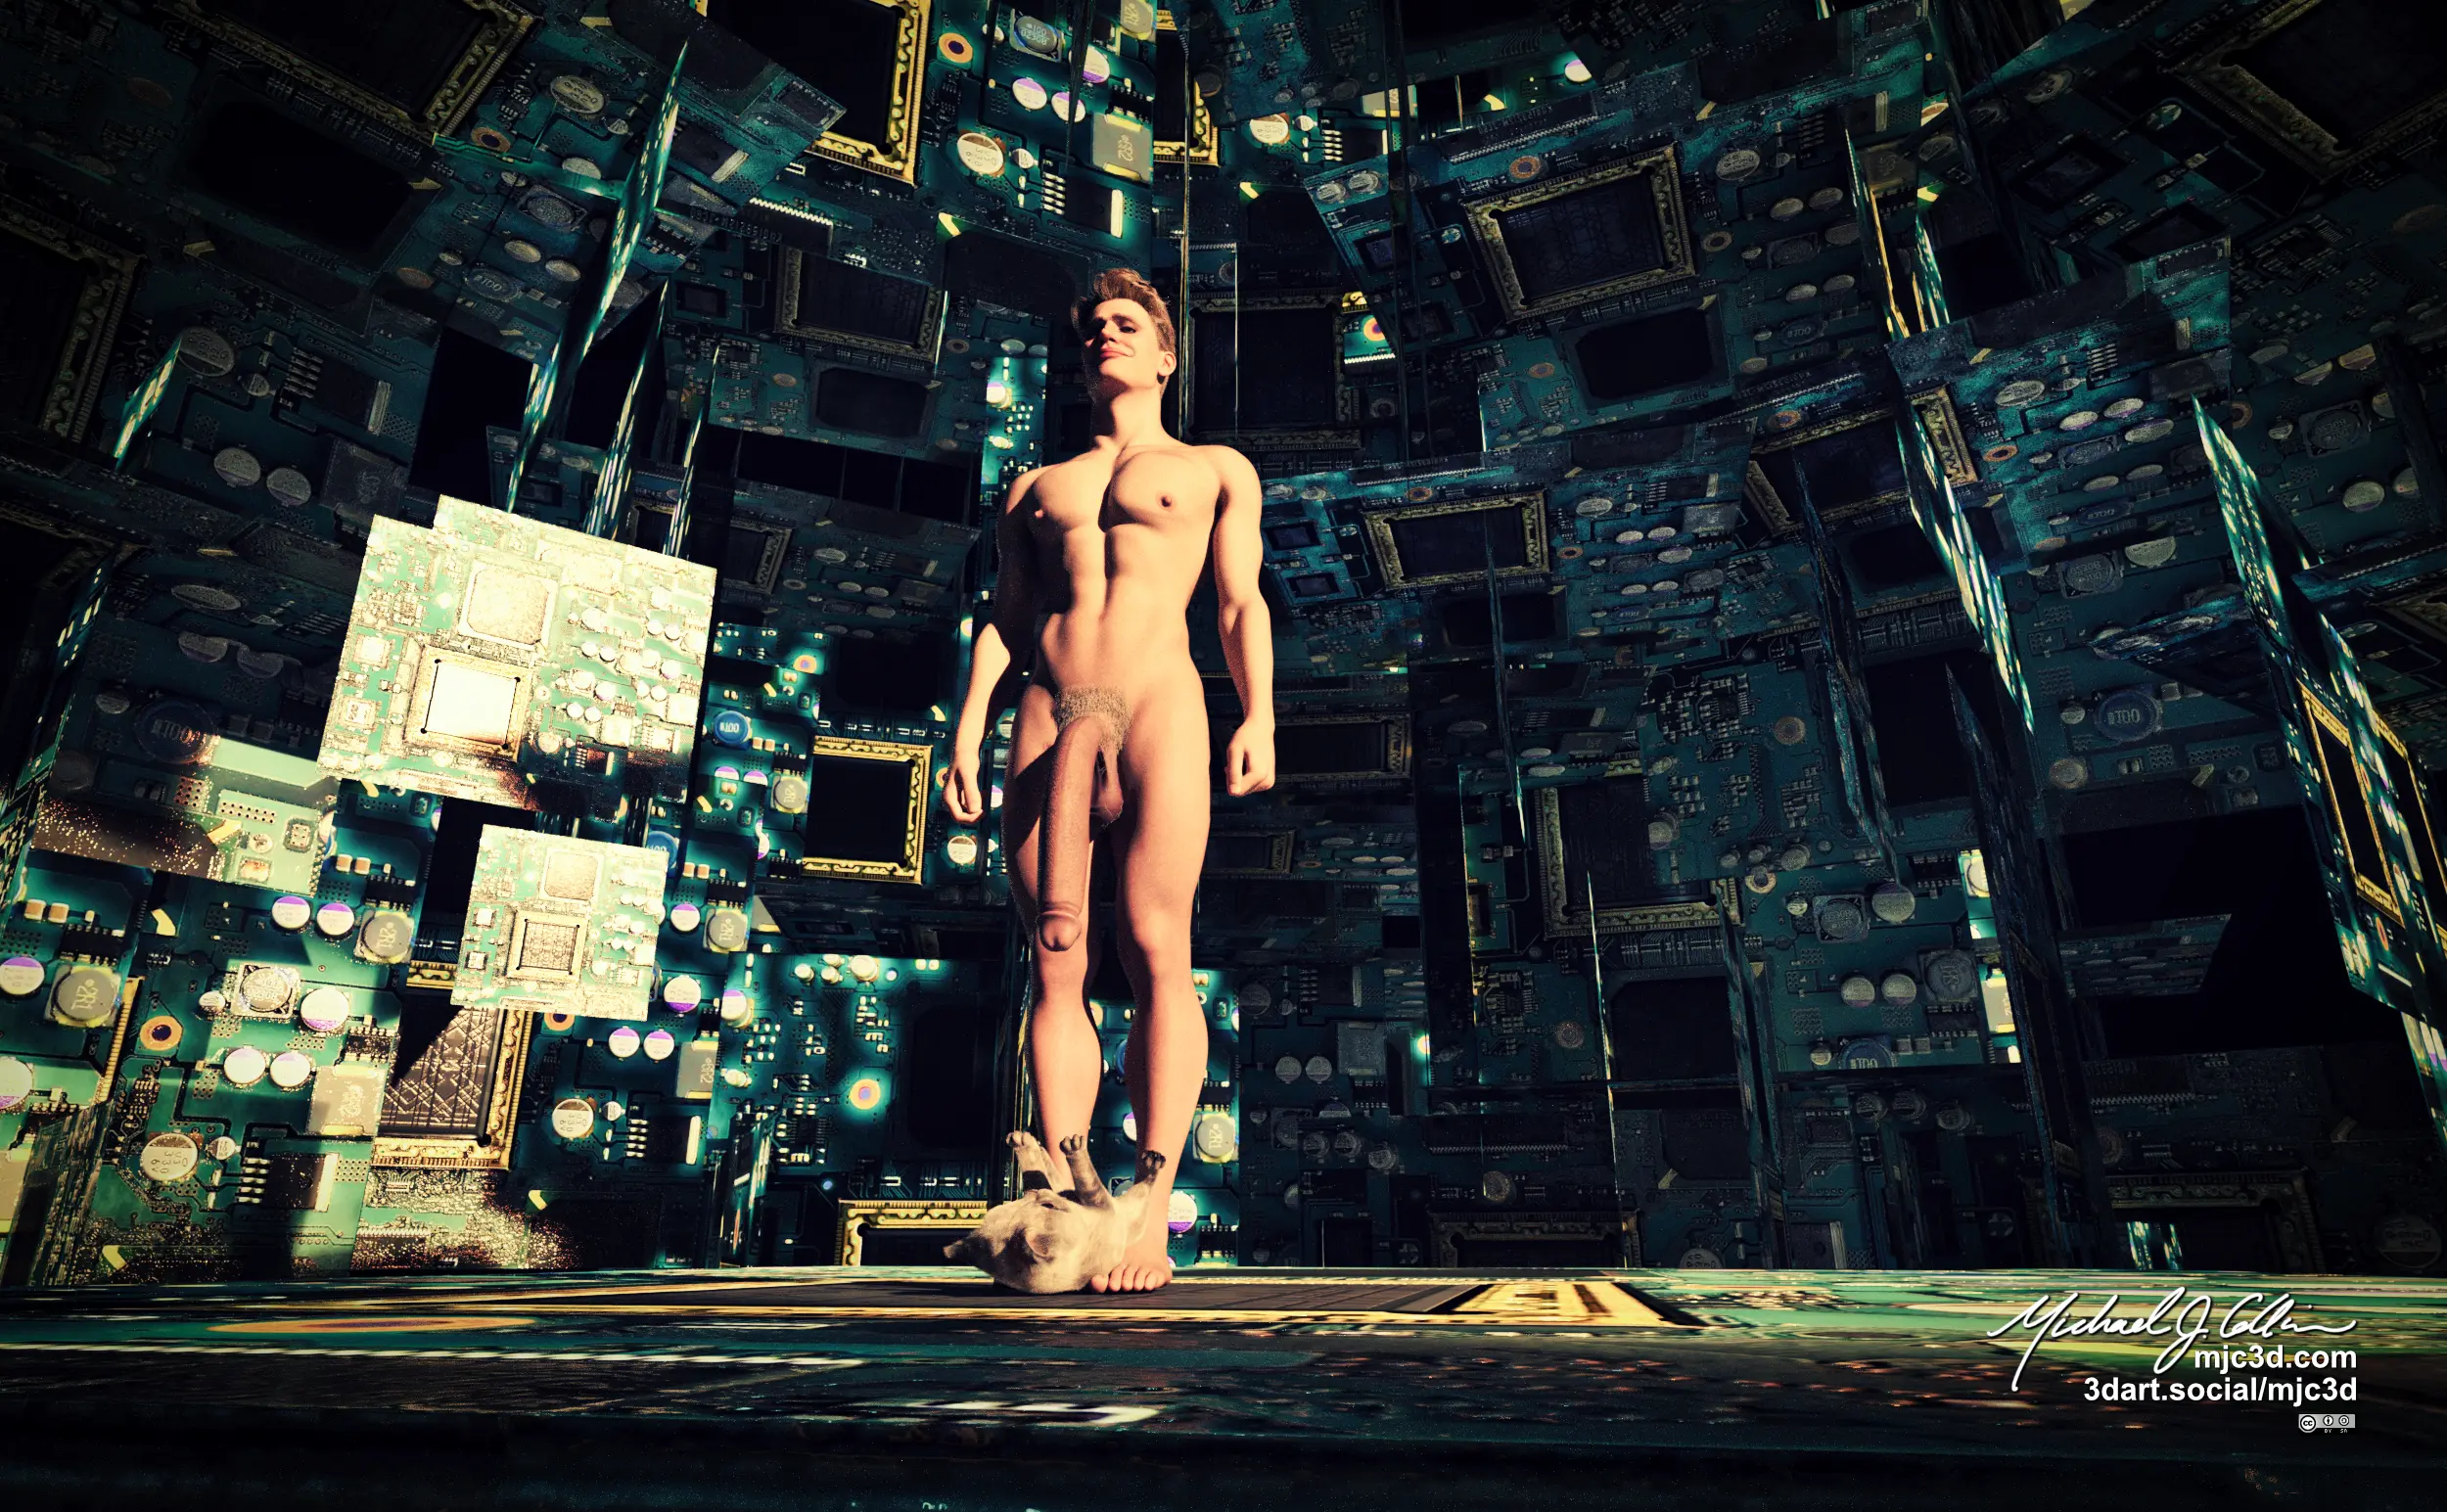 3D rendered image of a young, well-built, nude man, with an exceptionally long penis, standing on a platform in a cyberpunk/ futuristic technological room. There is a kitten laying across the man's feet with its paws stretched upwards reaching for the man's dangling penis. The man has a shit-eating grin on his face.